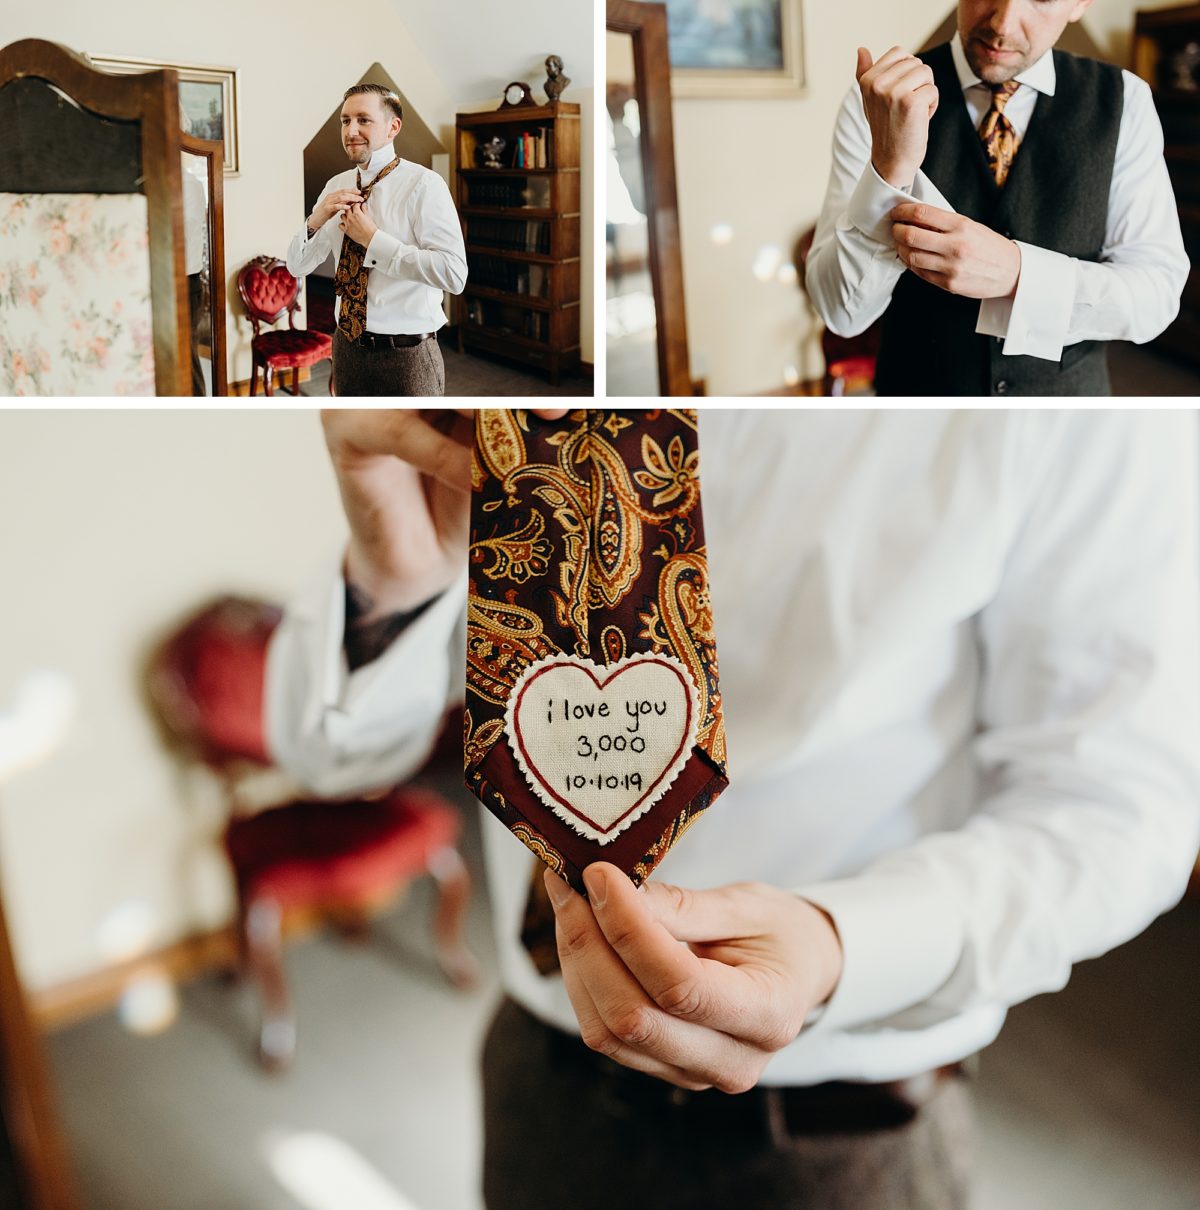 The bride sewed this special message on her groom's tie for him to discover the morning of their wedding.